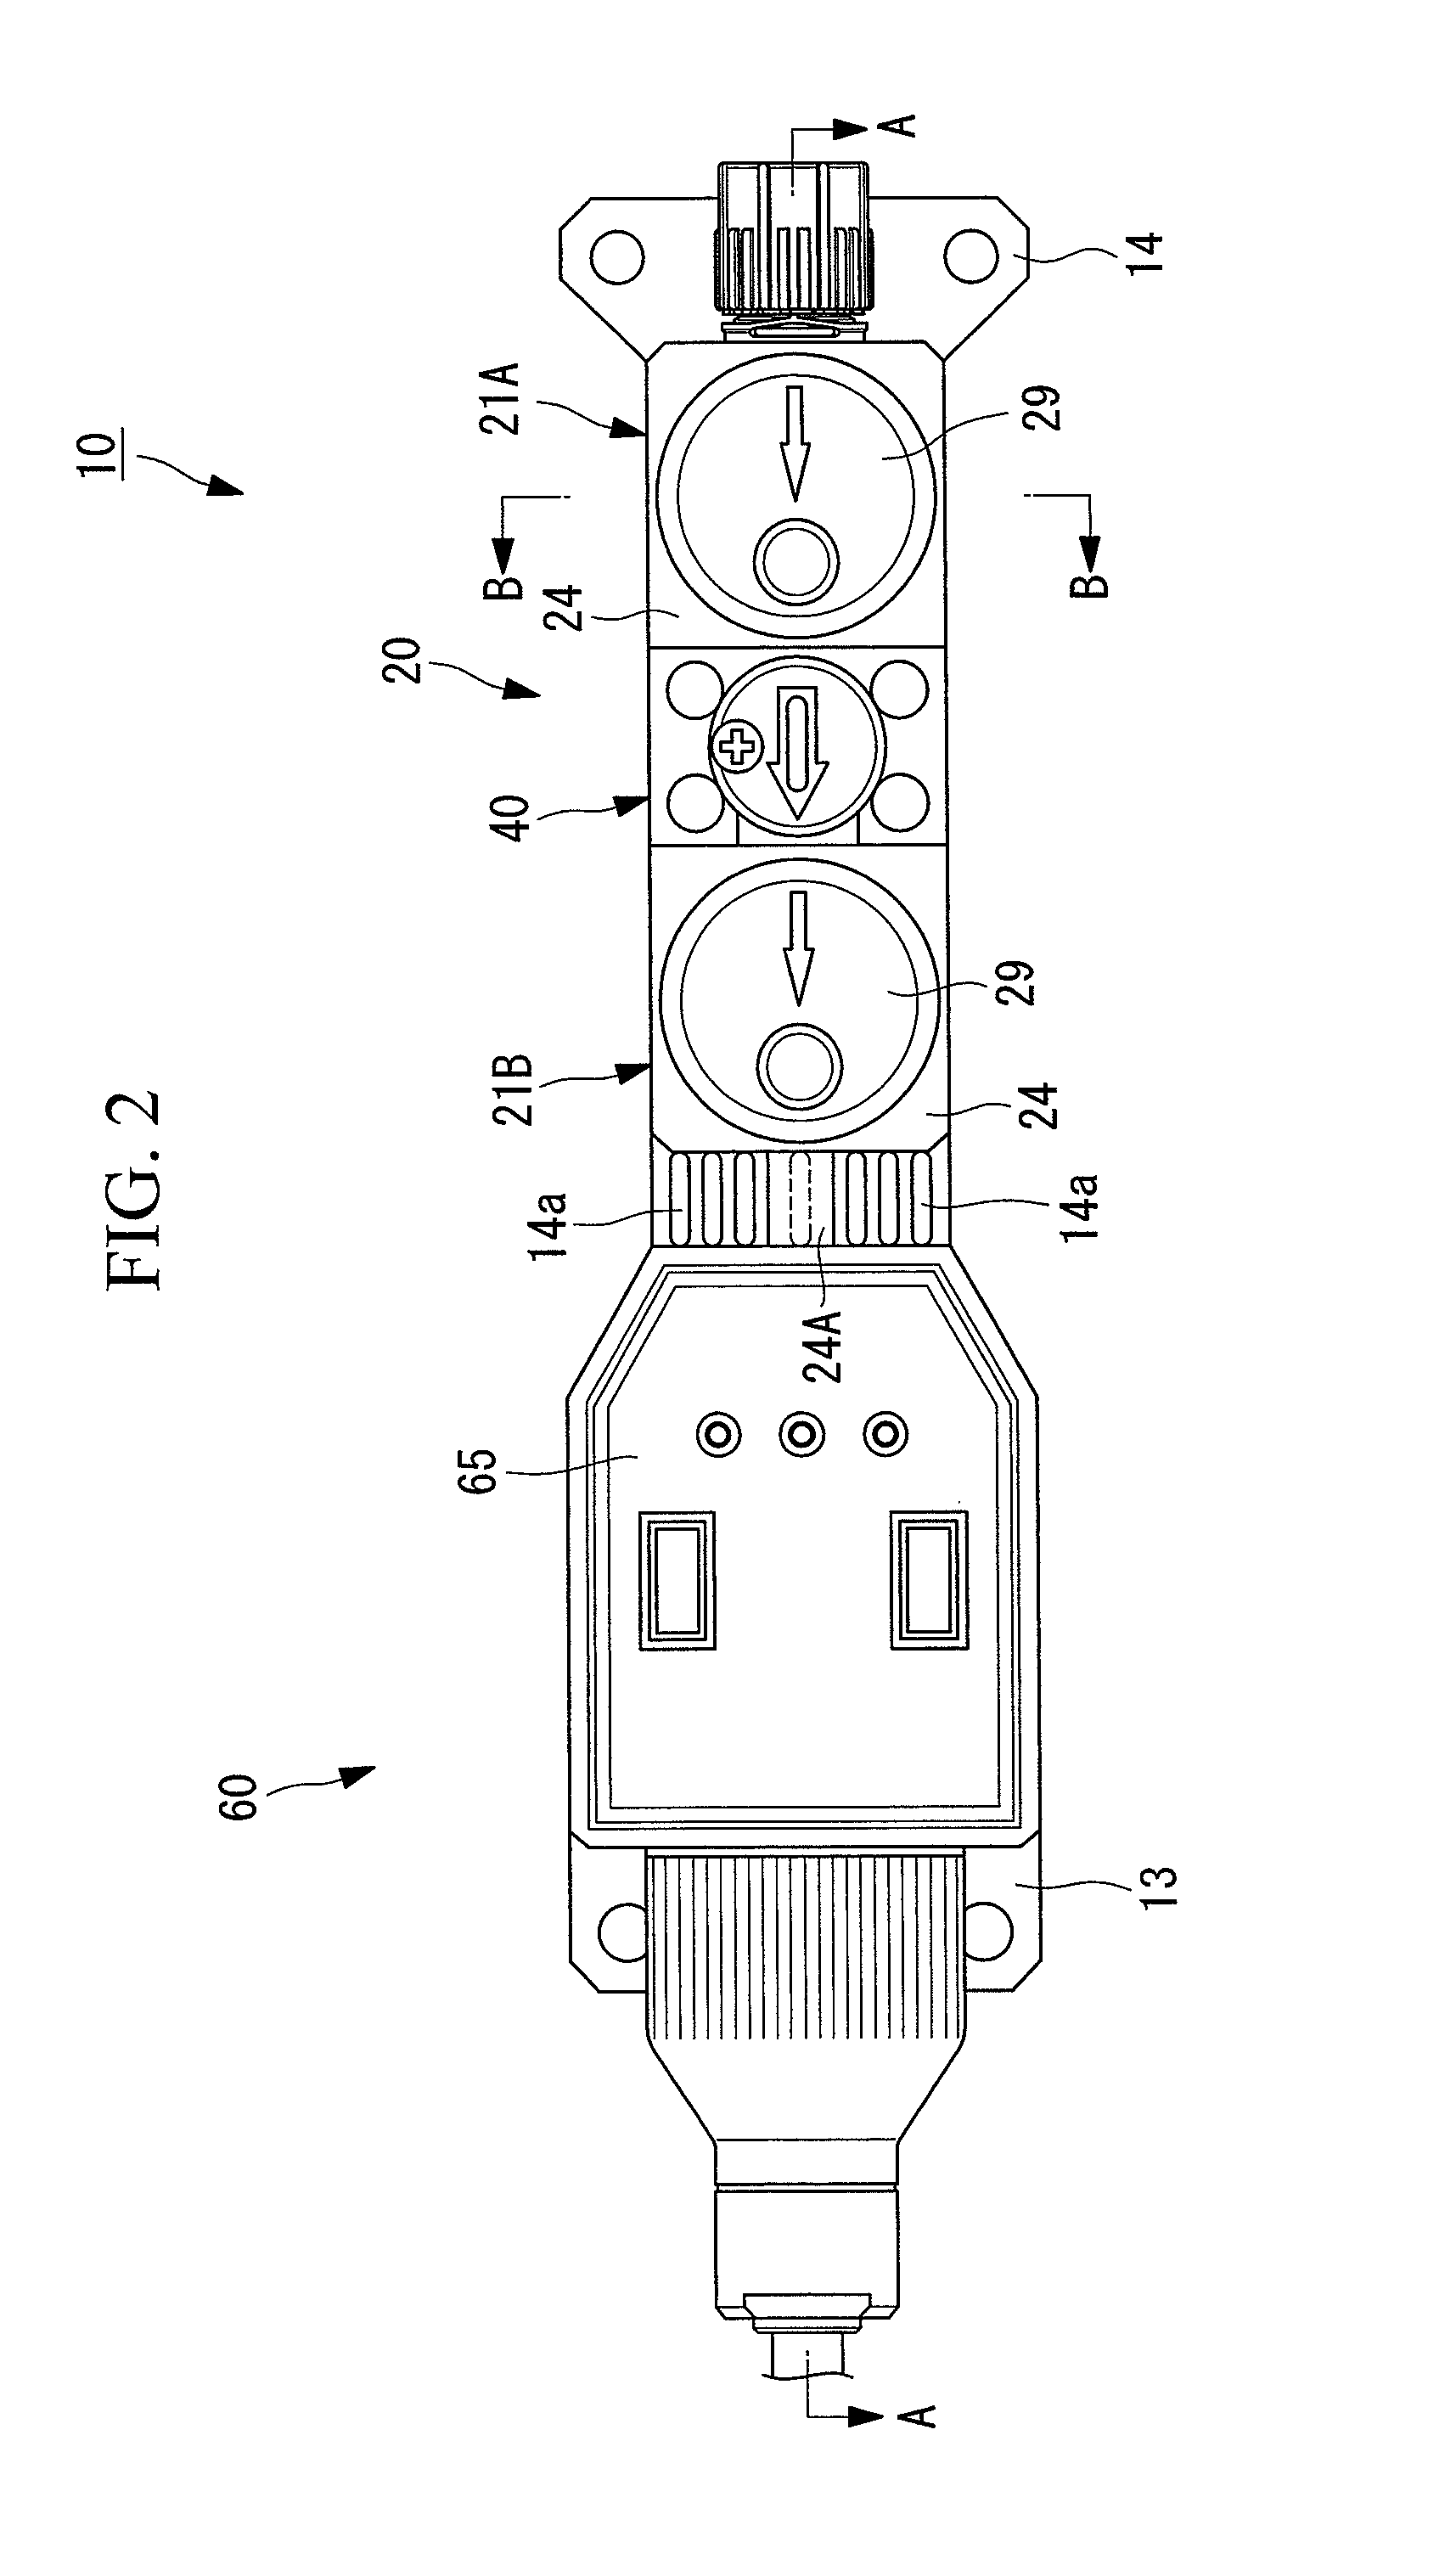 Differential-pressure flowmeter and flow-rate controller